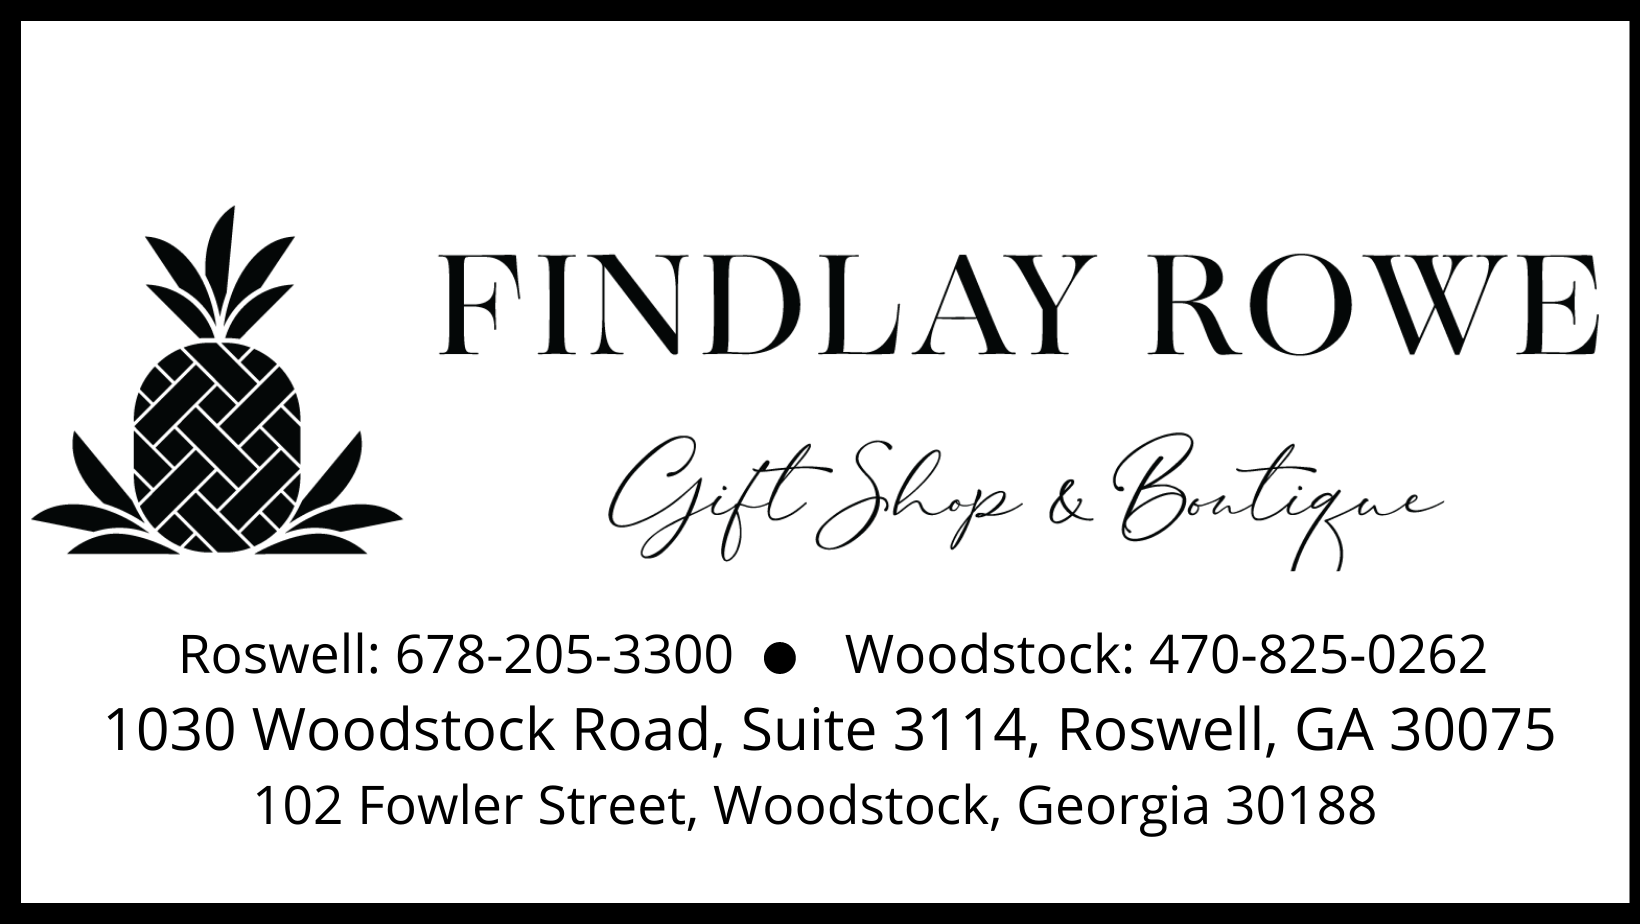 Findlay Rowe Gift Shop & Boutique